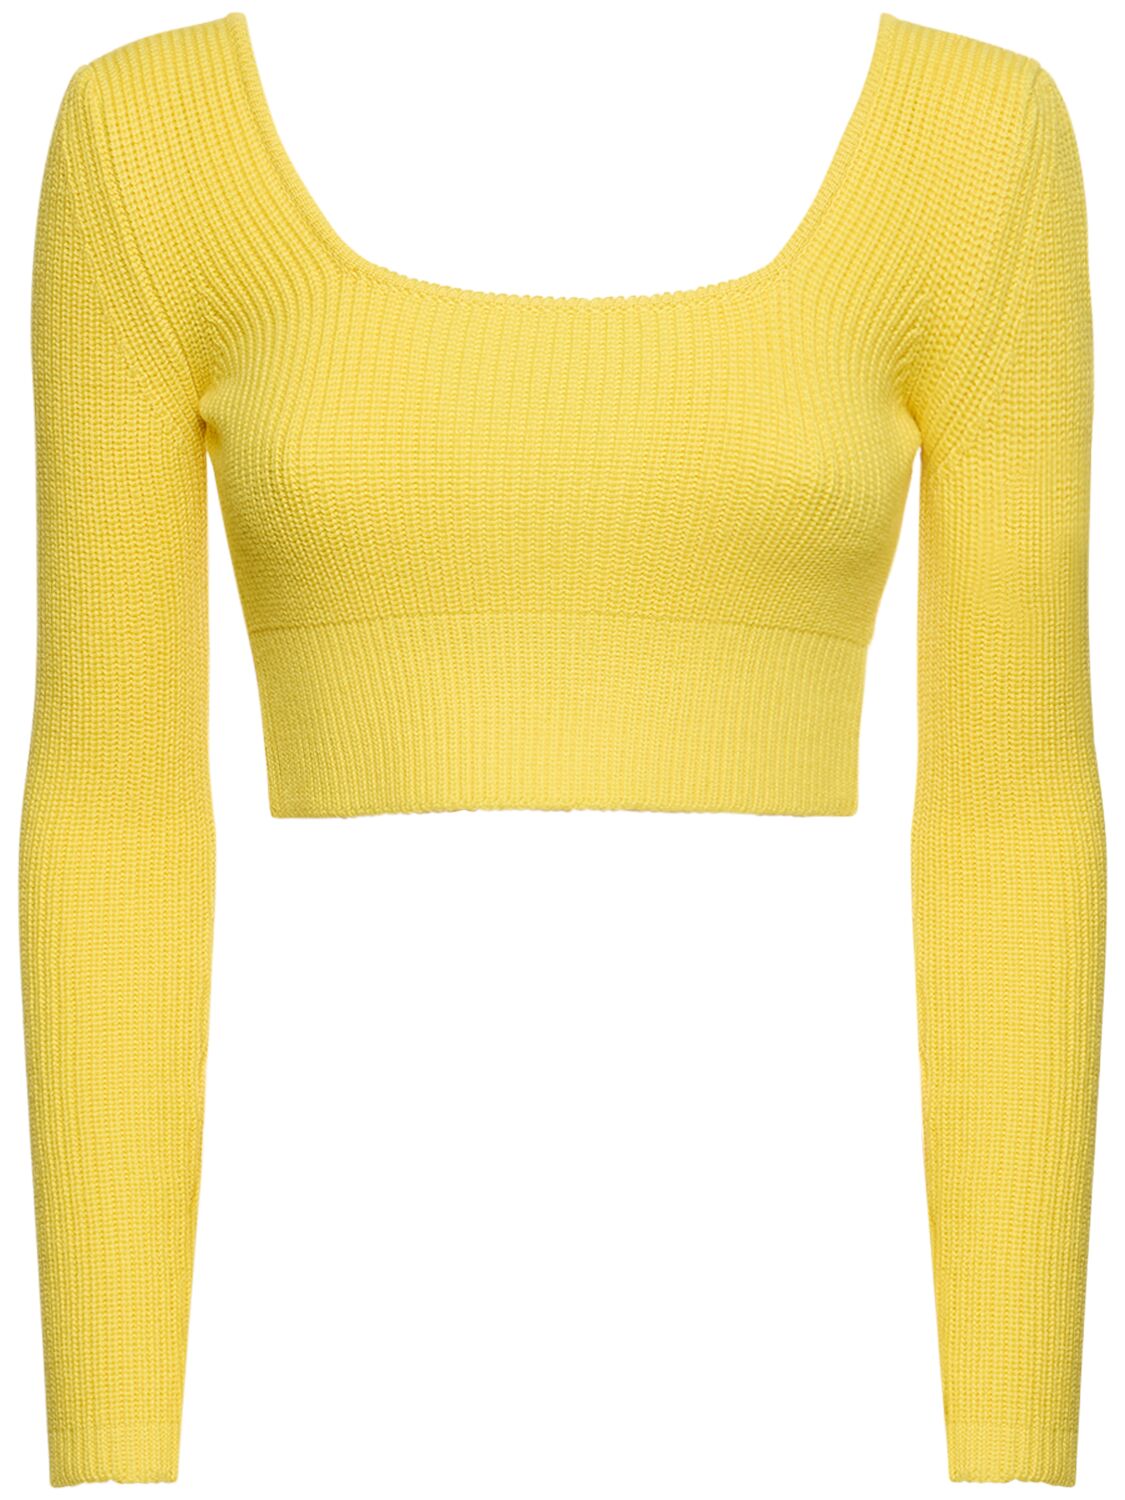 Image of Wool Rib Knit Open Back Cropped Top